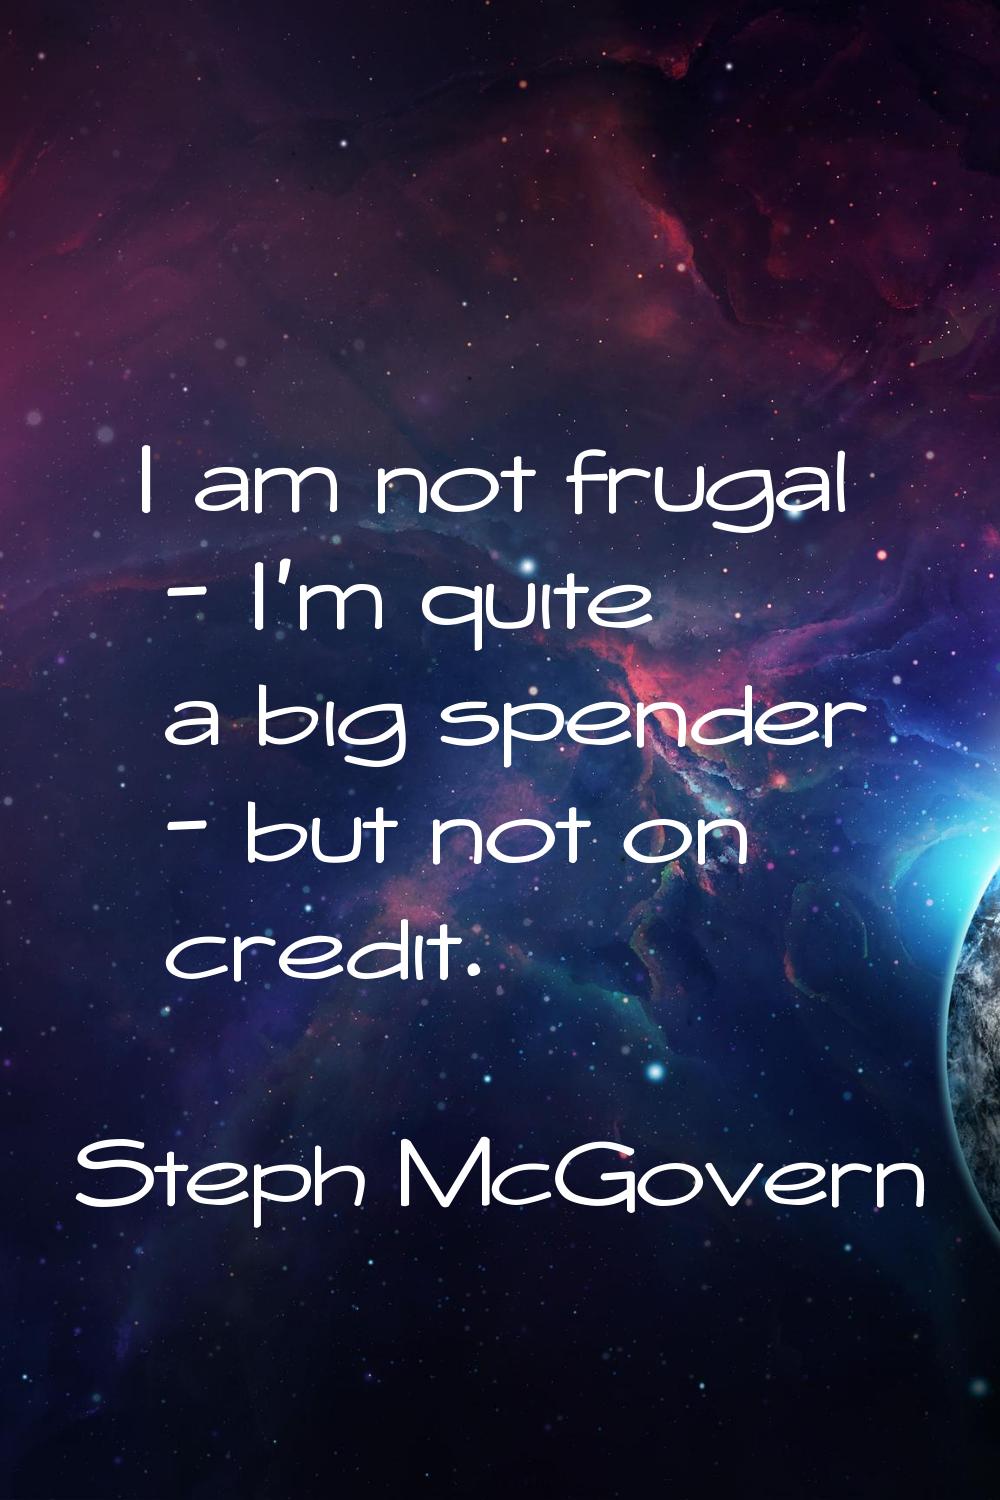 I am not frugal - I'm quite a big spender - but not on credit.